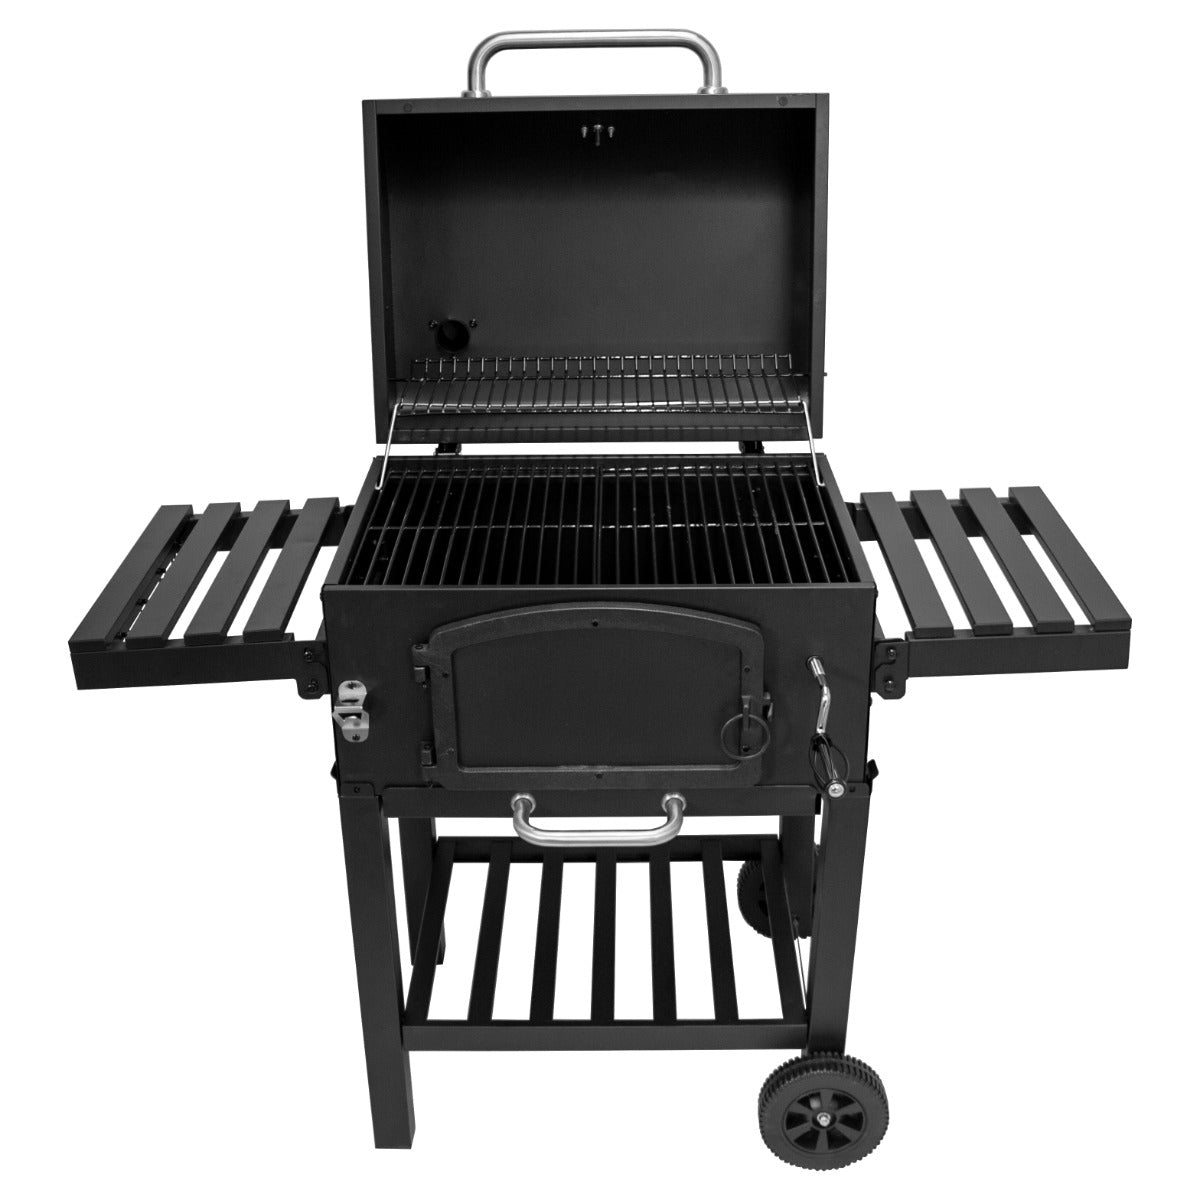 Barbecue Grill & Fumoir XL